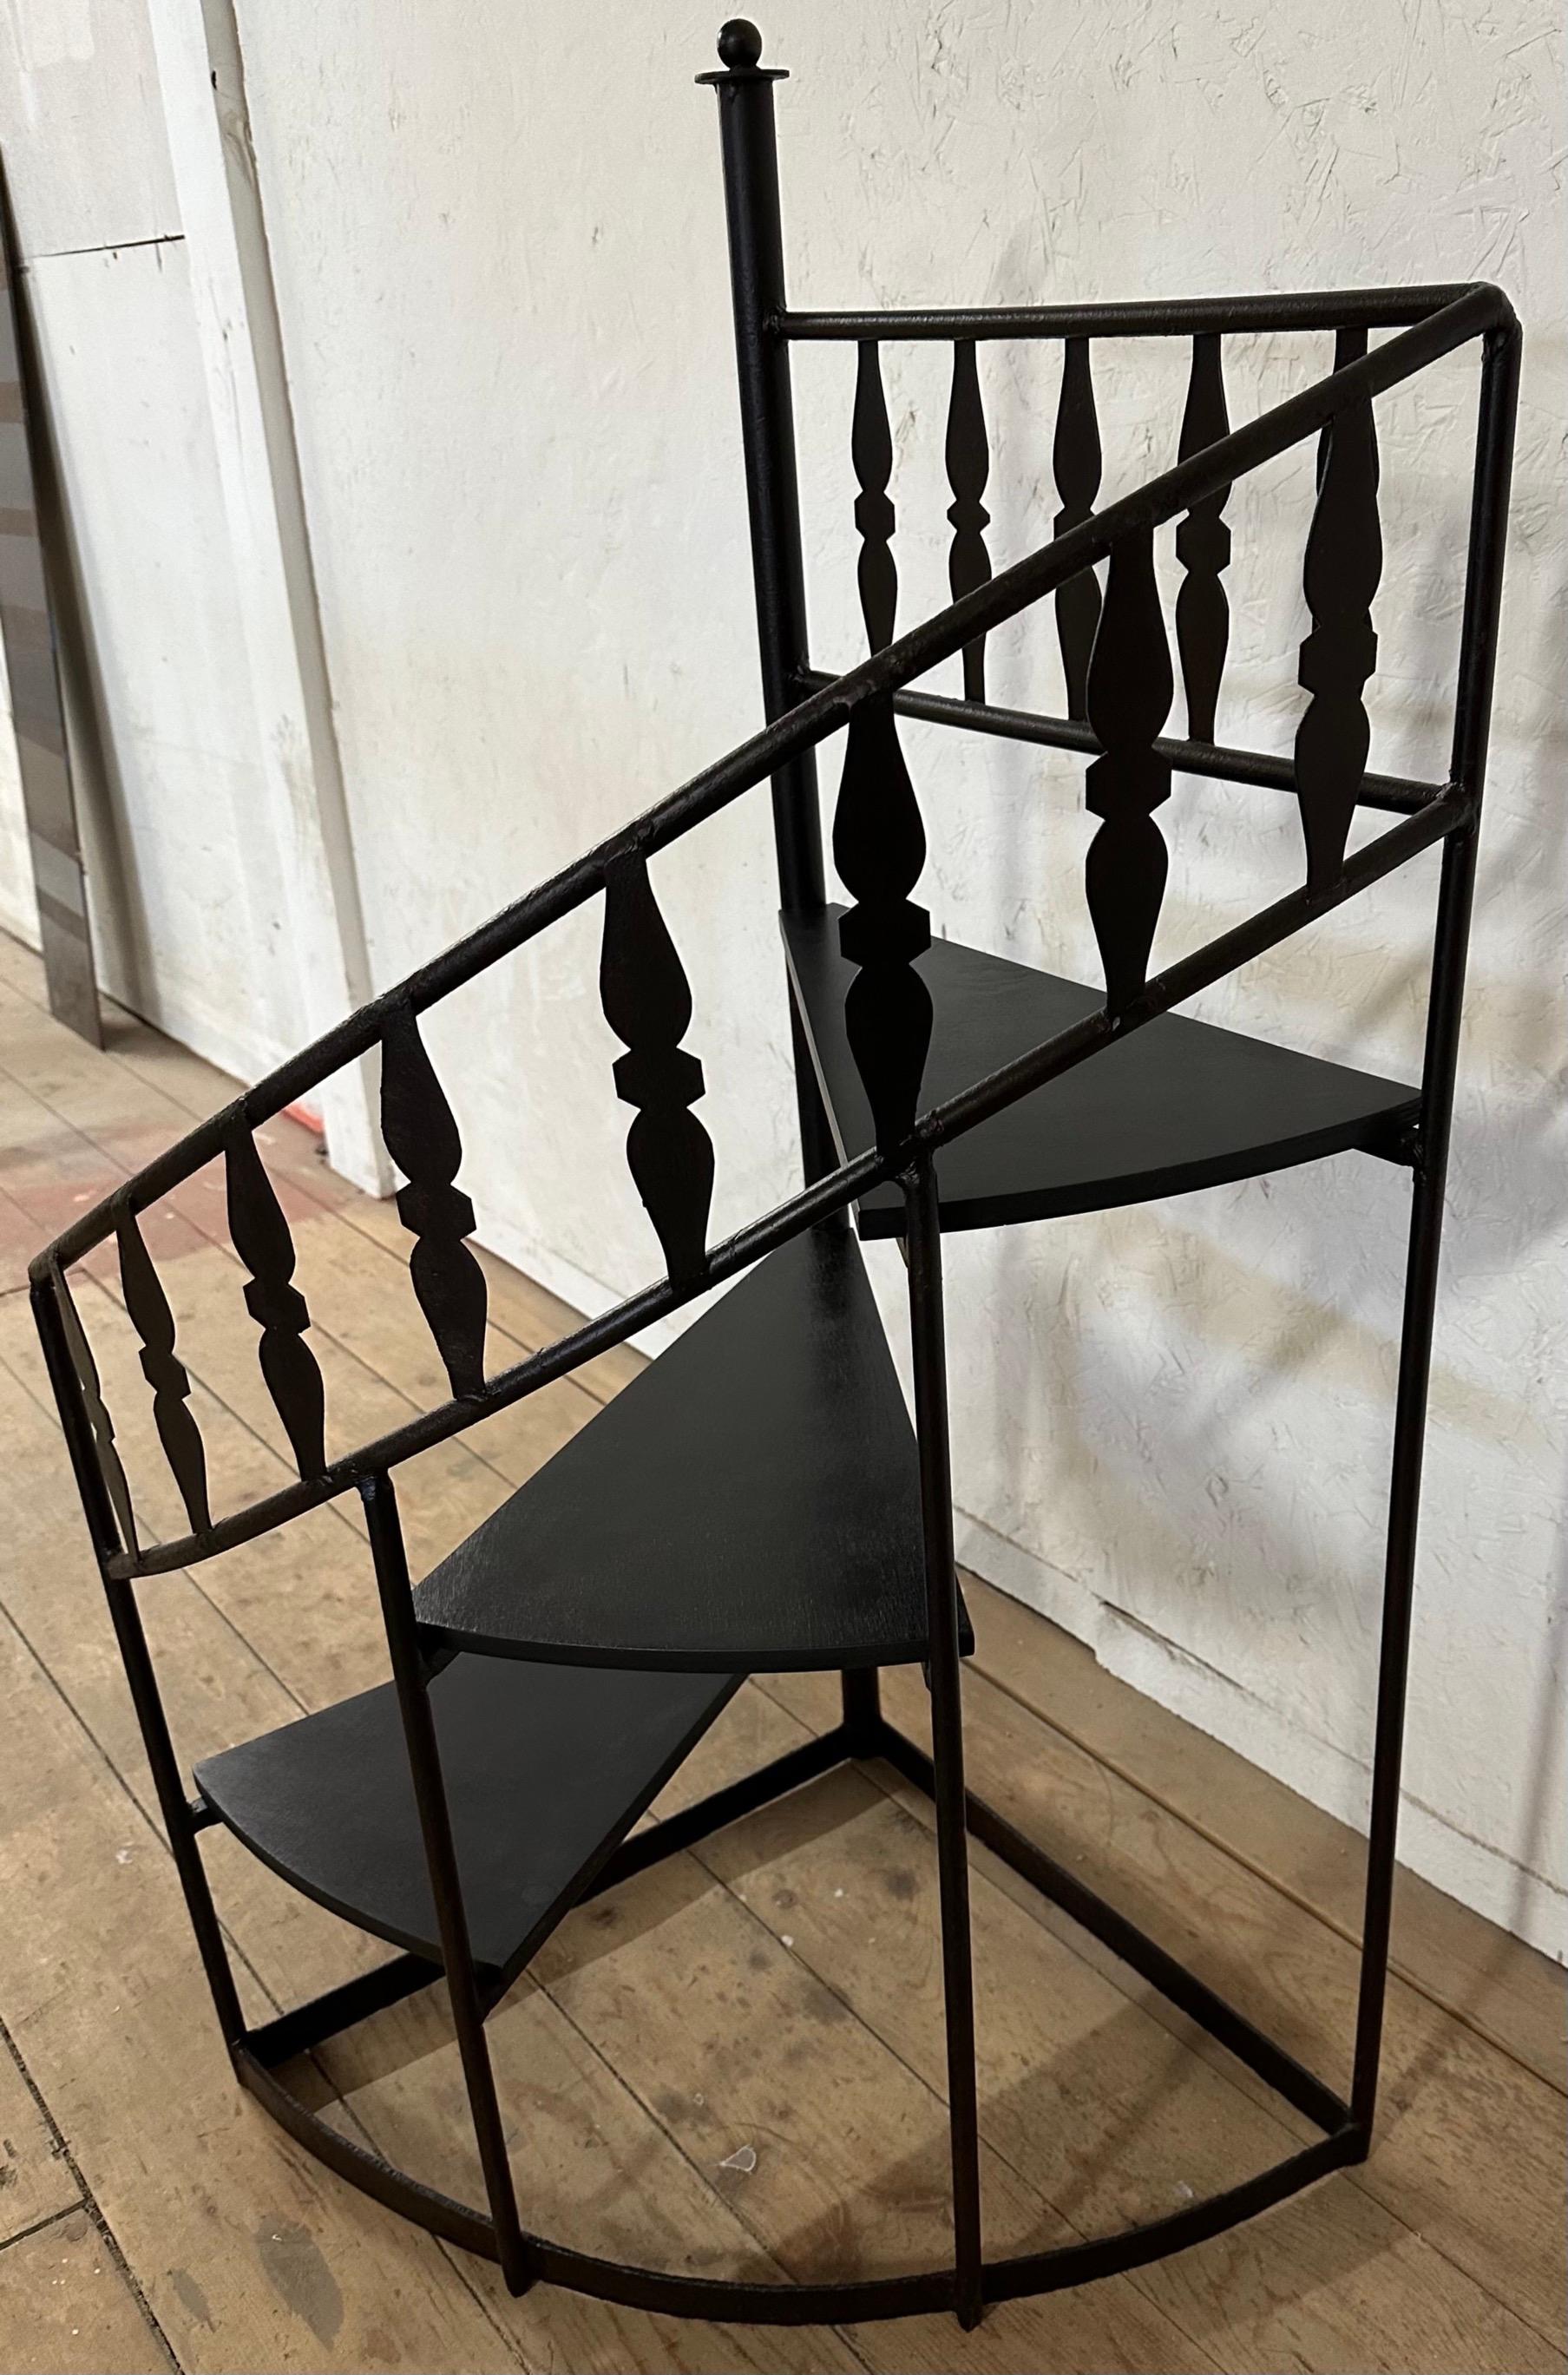 Midcentury Italian three steps wooden spiral steps with metal hand railing and top supporting metal guard rail with rising post and finial. Use this vintage staircase to organize books in your office or library, as well as in any other room that